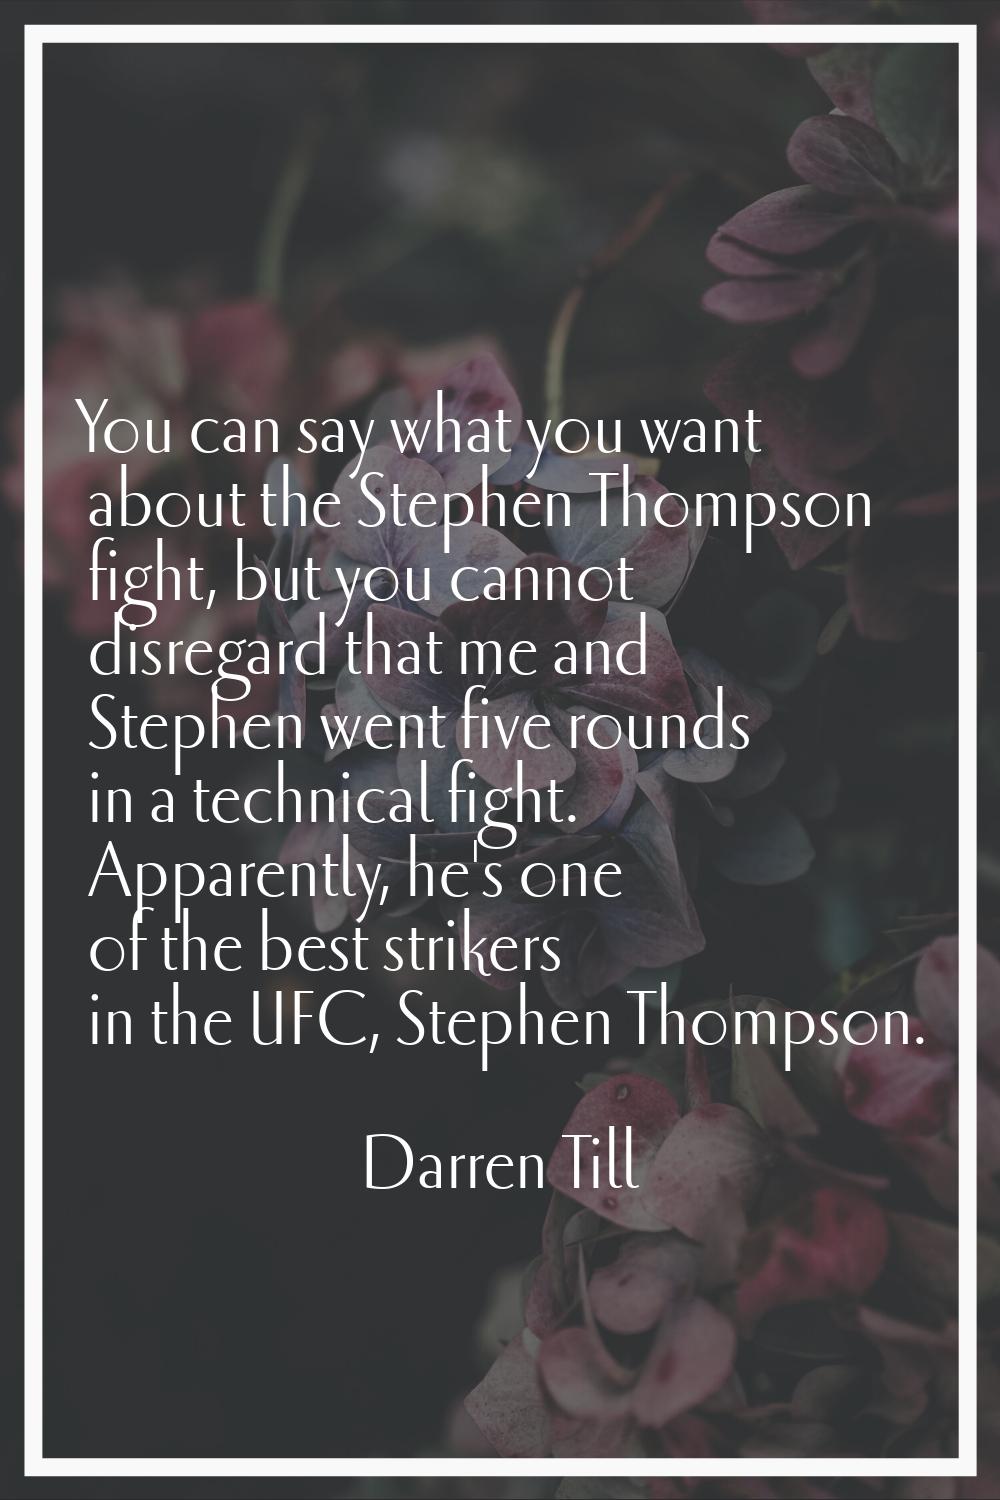 You can say what you want about the Stephen Thompson fight, but you cannot disregard that me and St